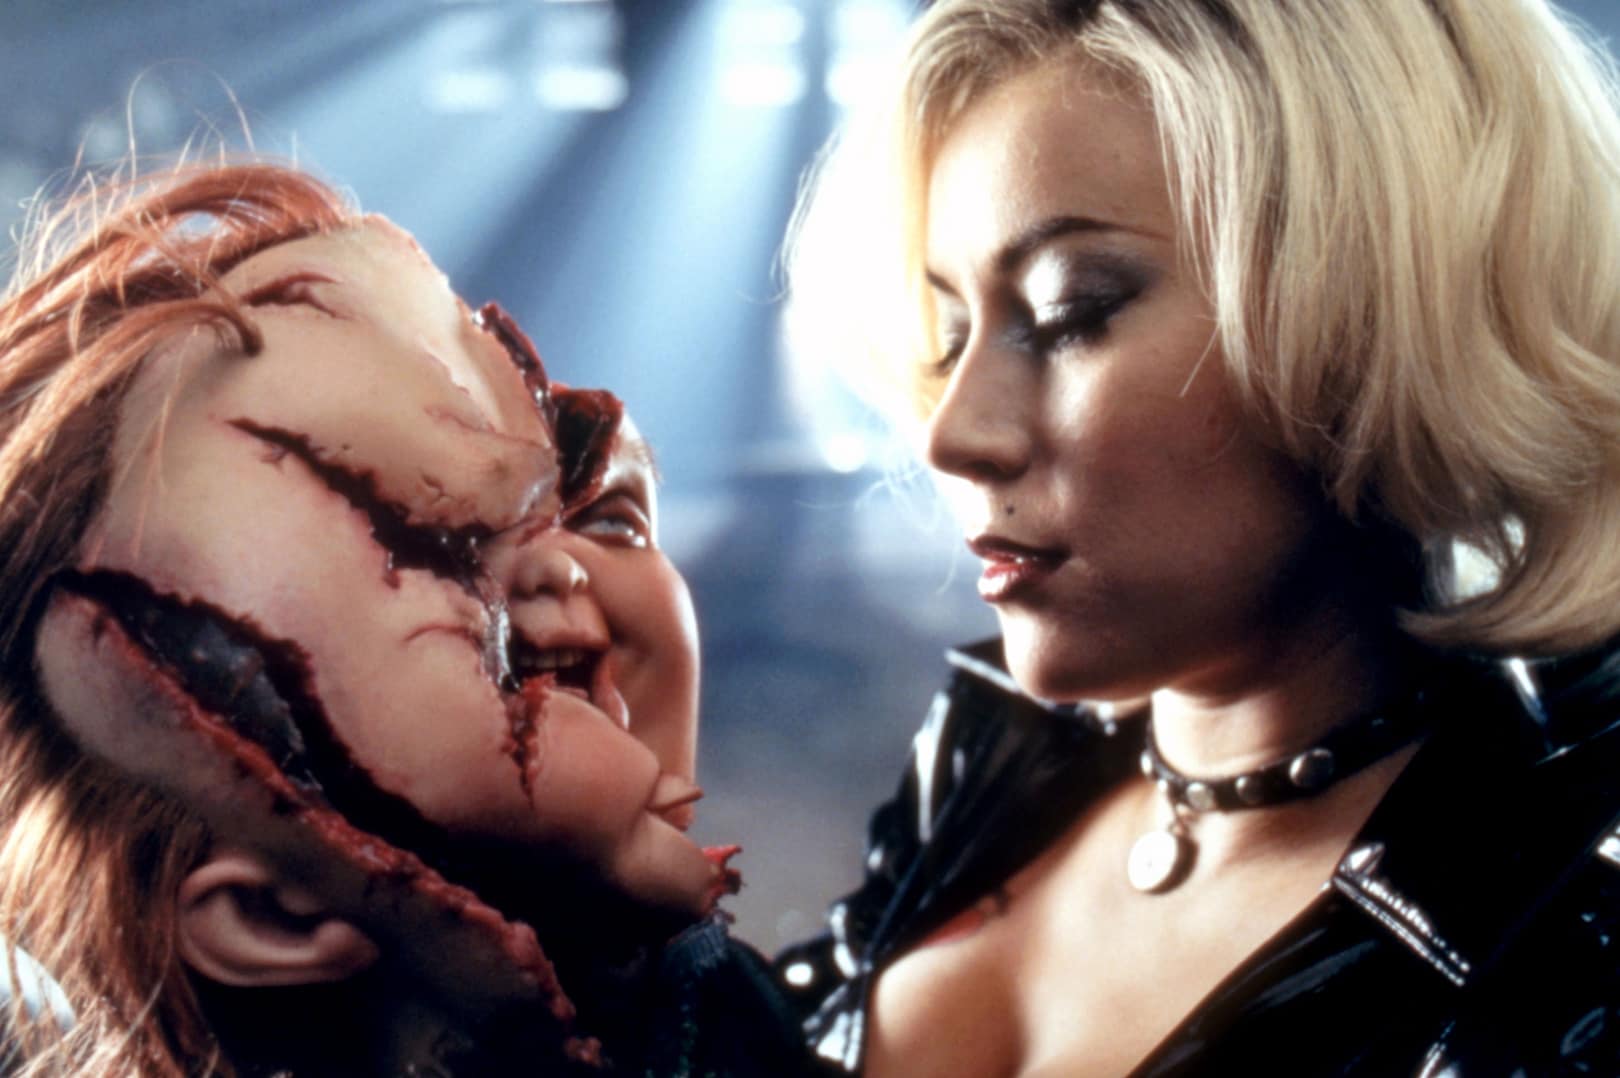 Poker Playing Actress Jennifer Tilly to ‘Sit Out’ New ‘Child’s Play’ Flick